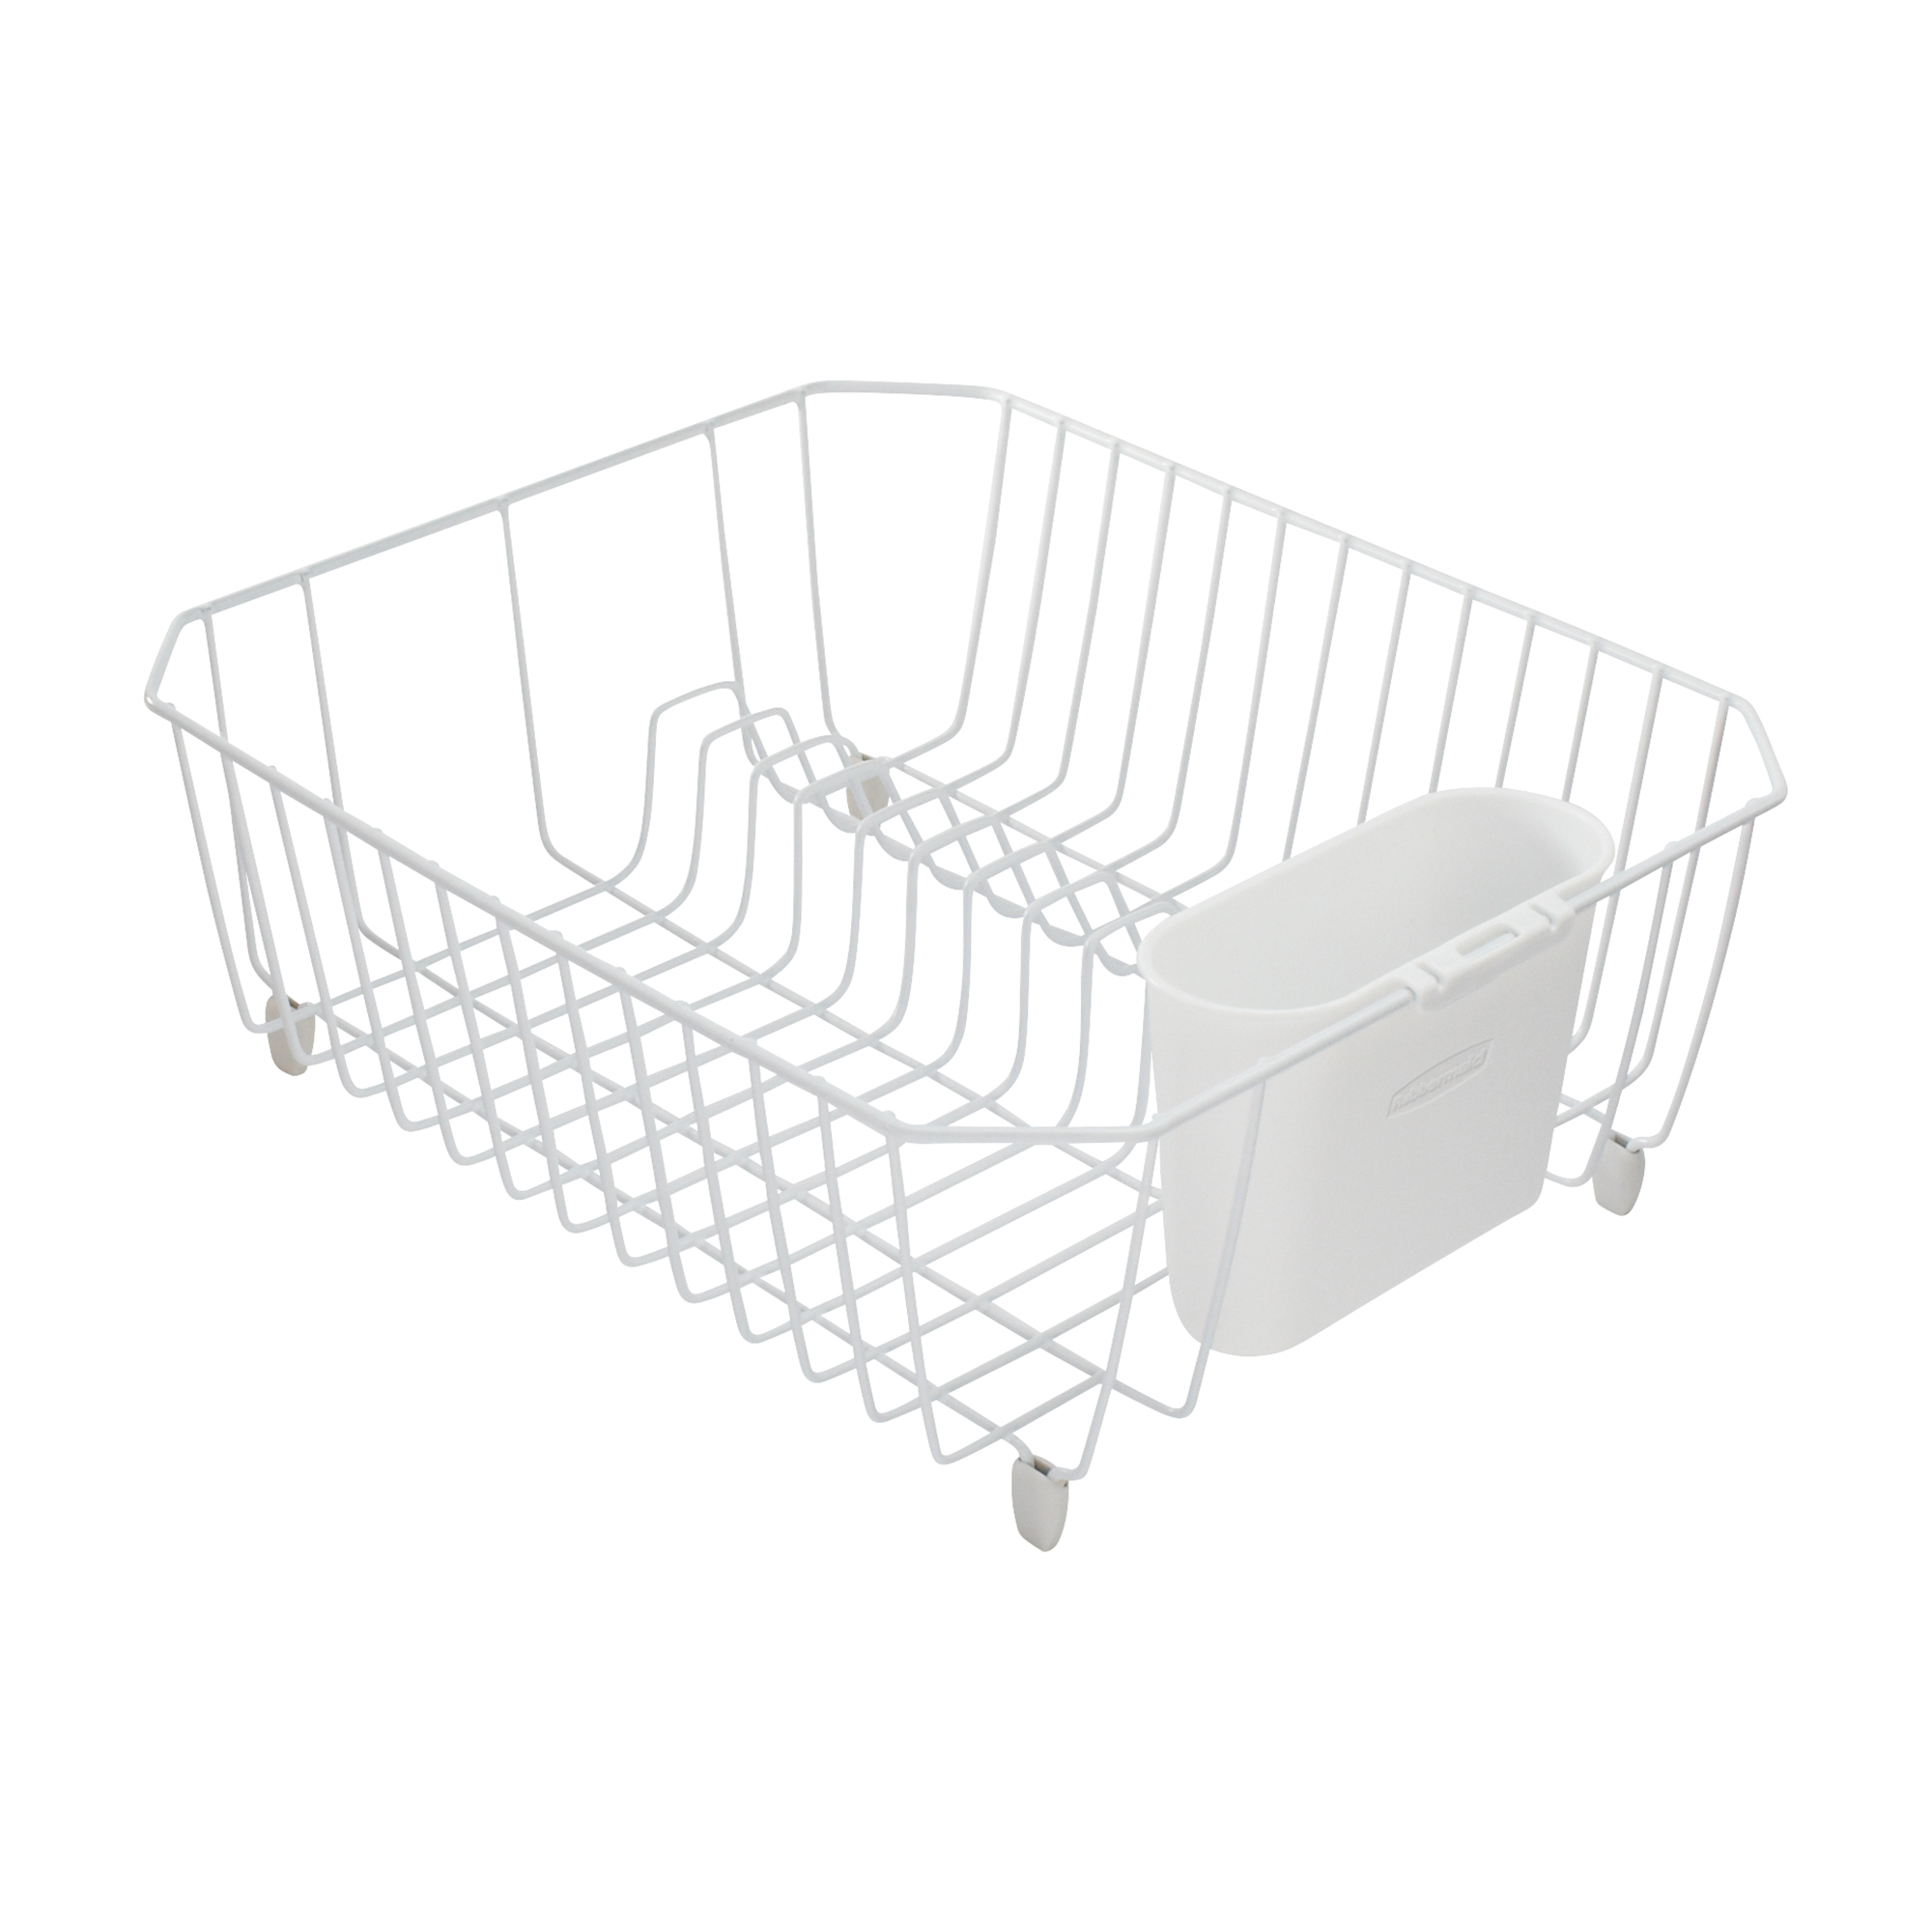 Rubbermaid 5.3 In. H X 12.4 In. W X 14.3 In. L Steel Dish Drainer White - image 1 of 2